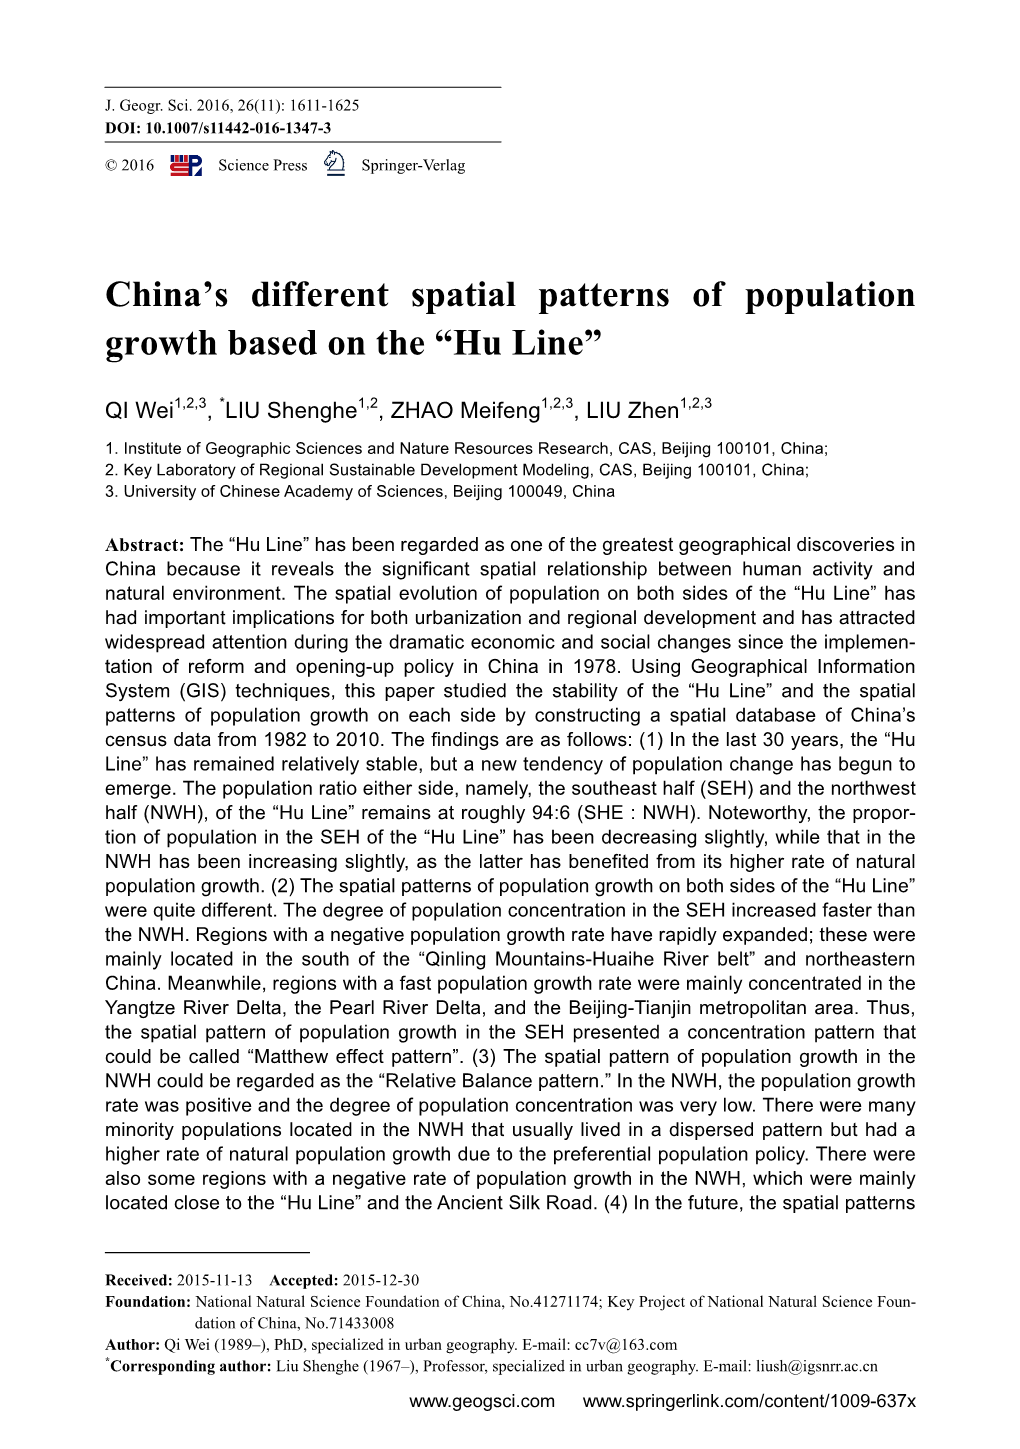 China's Different Spatial Patterns of Population Growth Based On